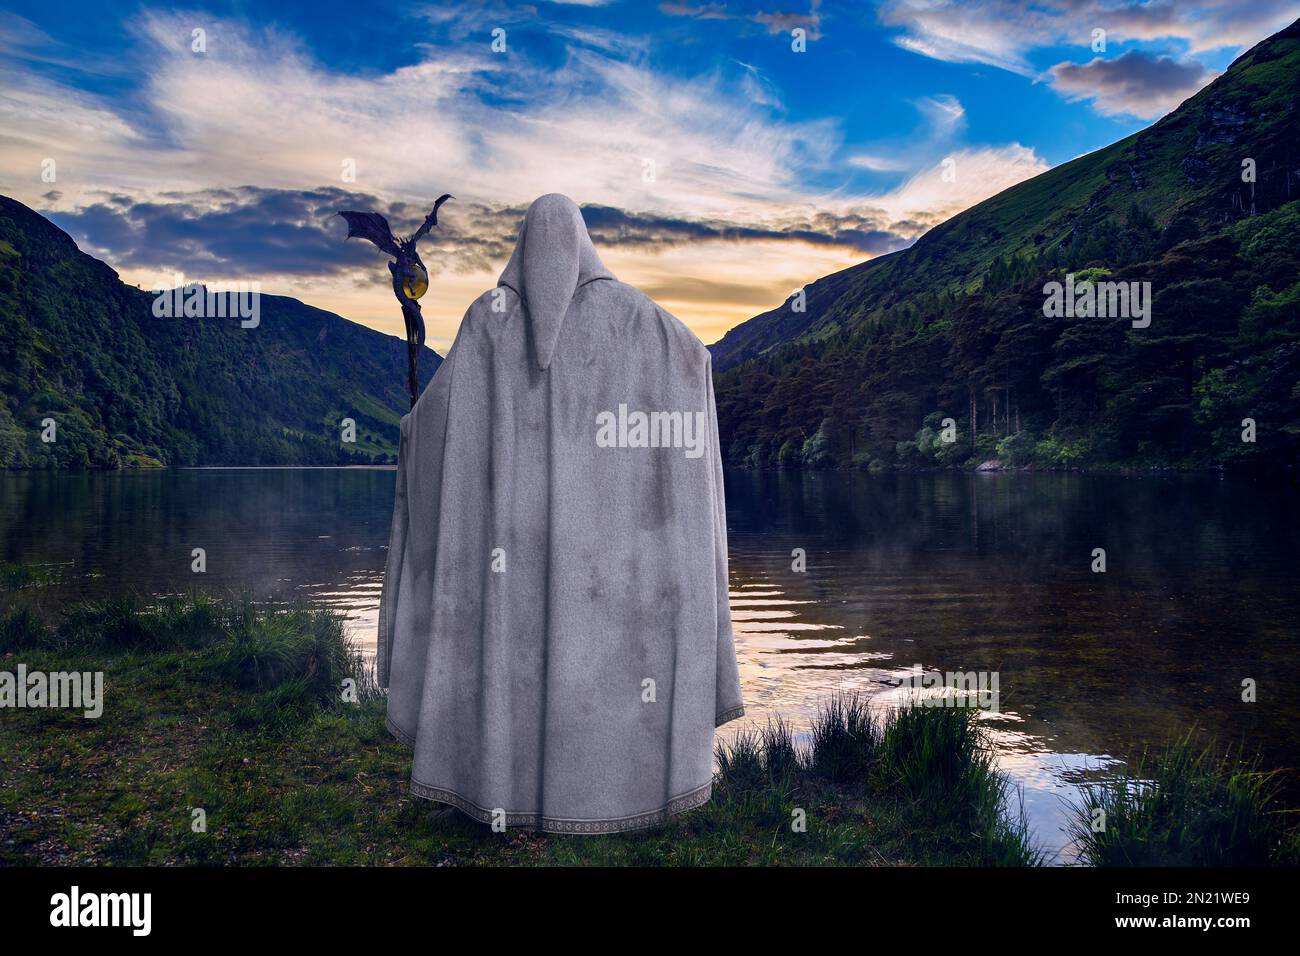 A legendary wise wizard wearing long white cloak and holding his magic staff looks across a mystical lake at sunset. 3D illustration and photo composi Stock Photo